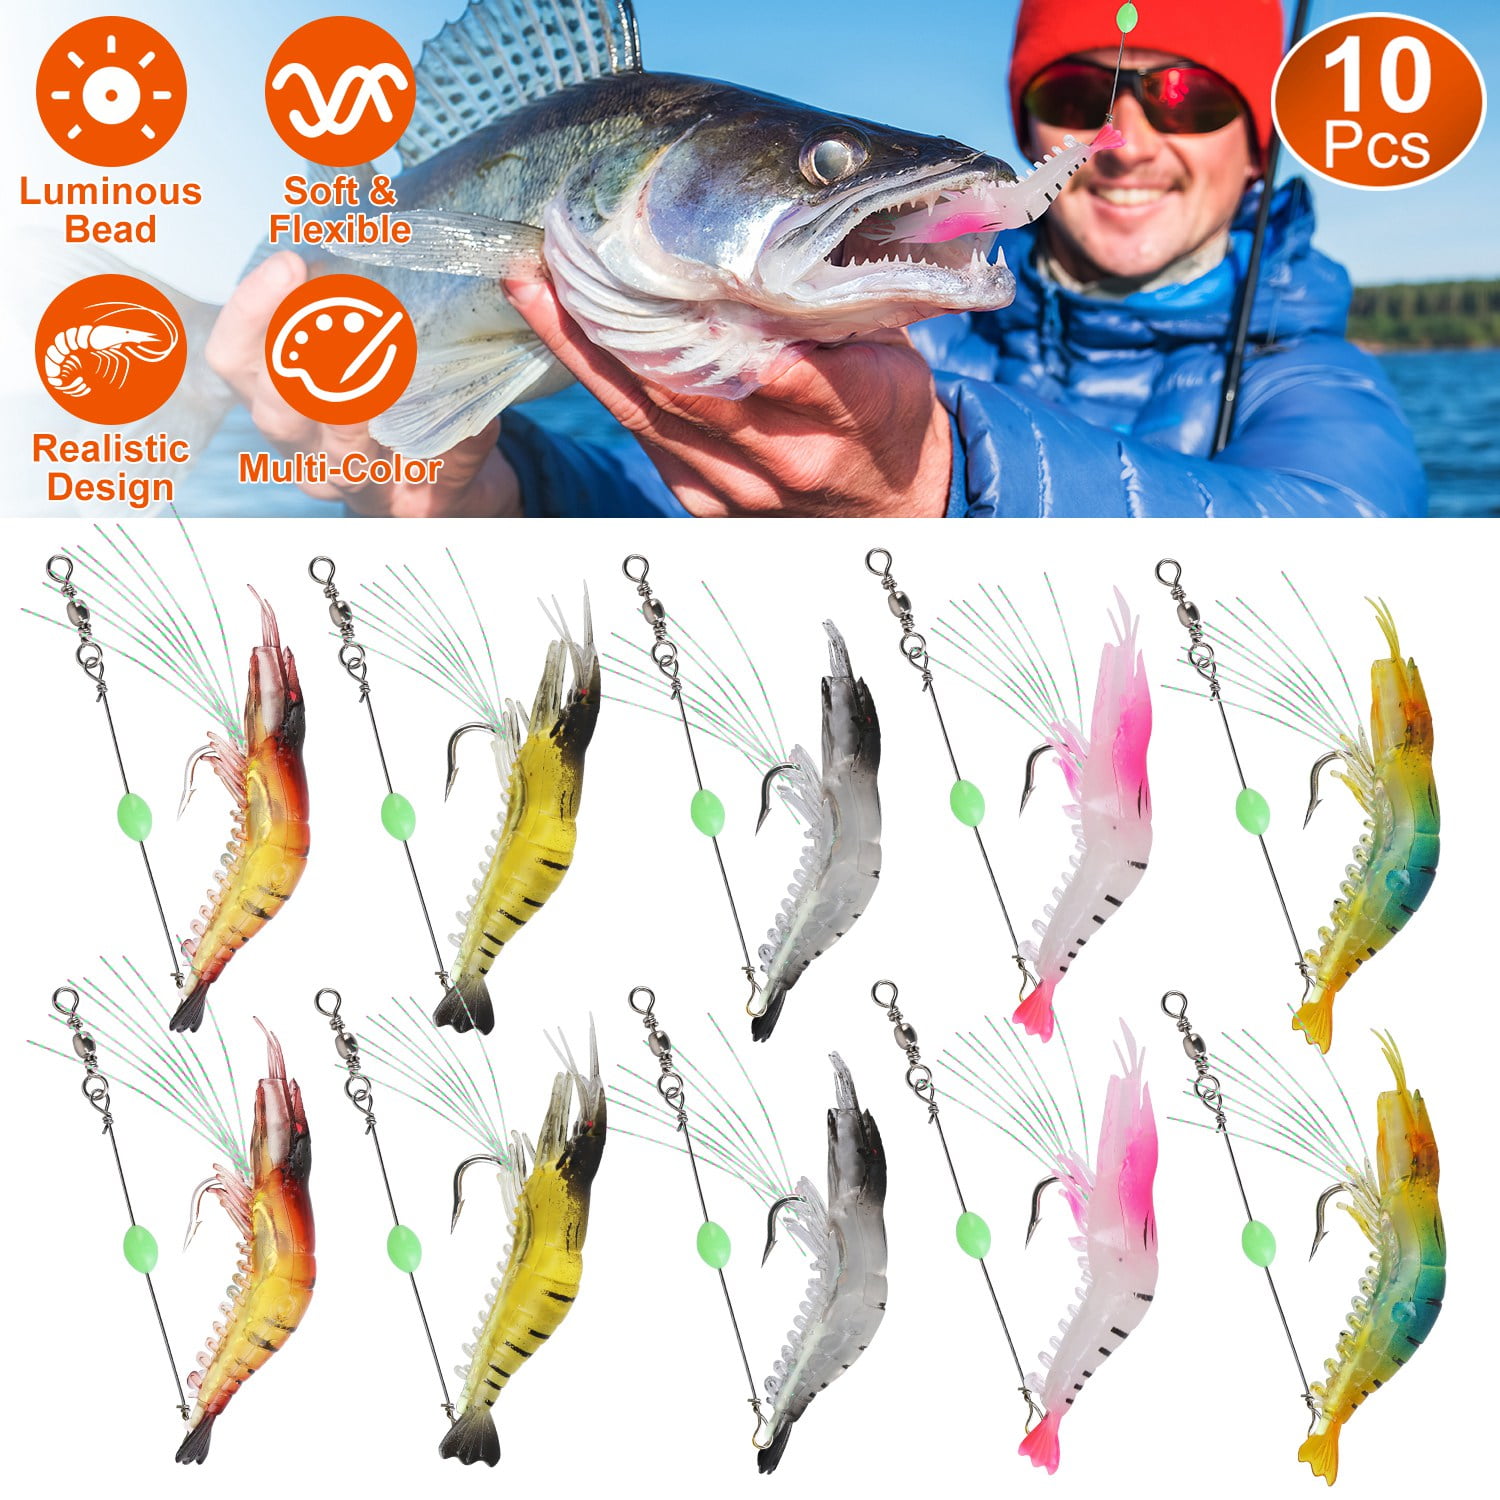 6pcs 2.755 Inch Luminous Artificial Silicone Shrimp Lure 0.246 Oz Fishing  Tackle with Hook Suitable for Ocean, River Soft Shrimp Simulate Artificial Soft  Lure